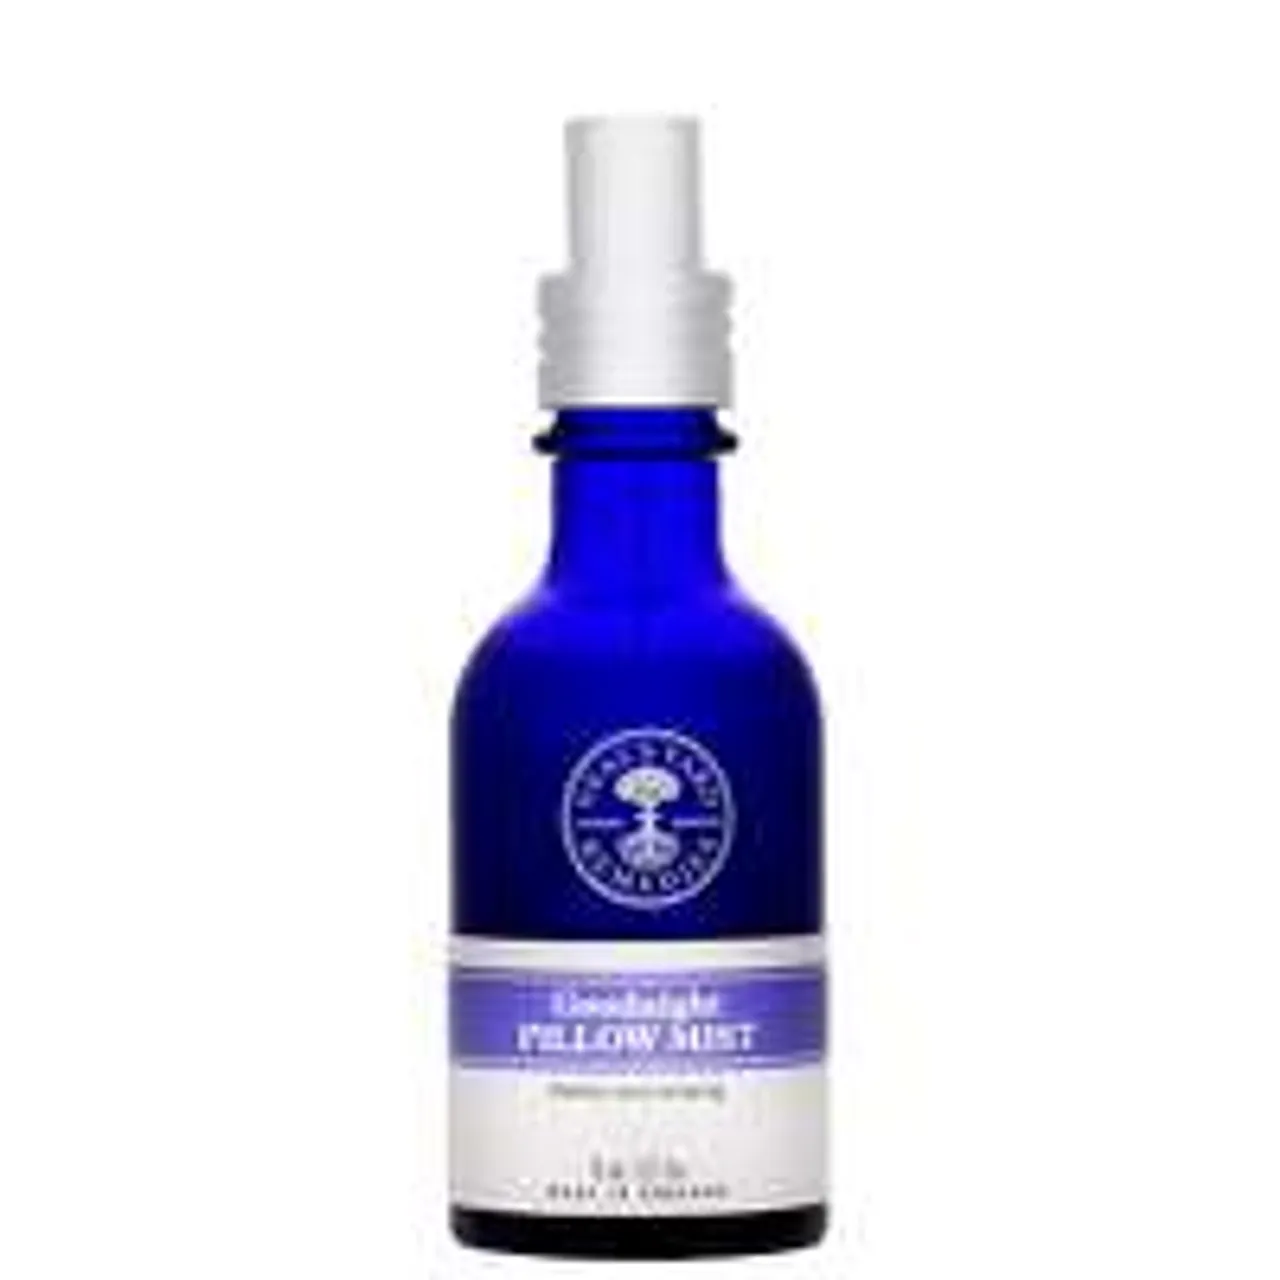 Neal's Yard Remedies Aromatherapy and Diffusers Goodnight Pillow Mist 45ml